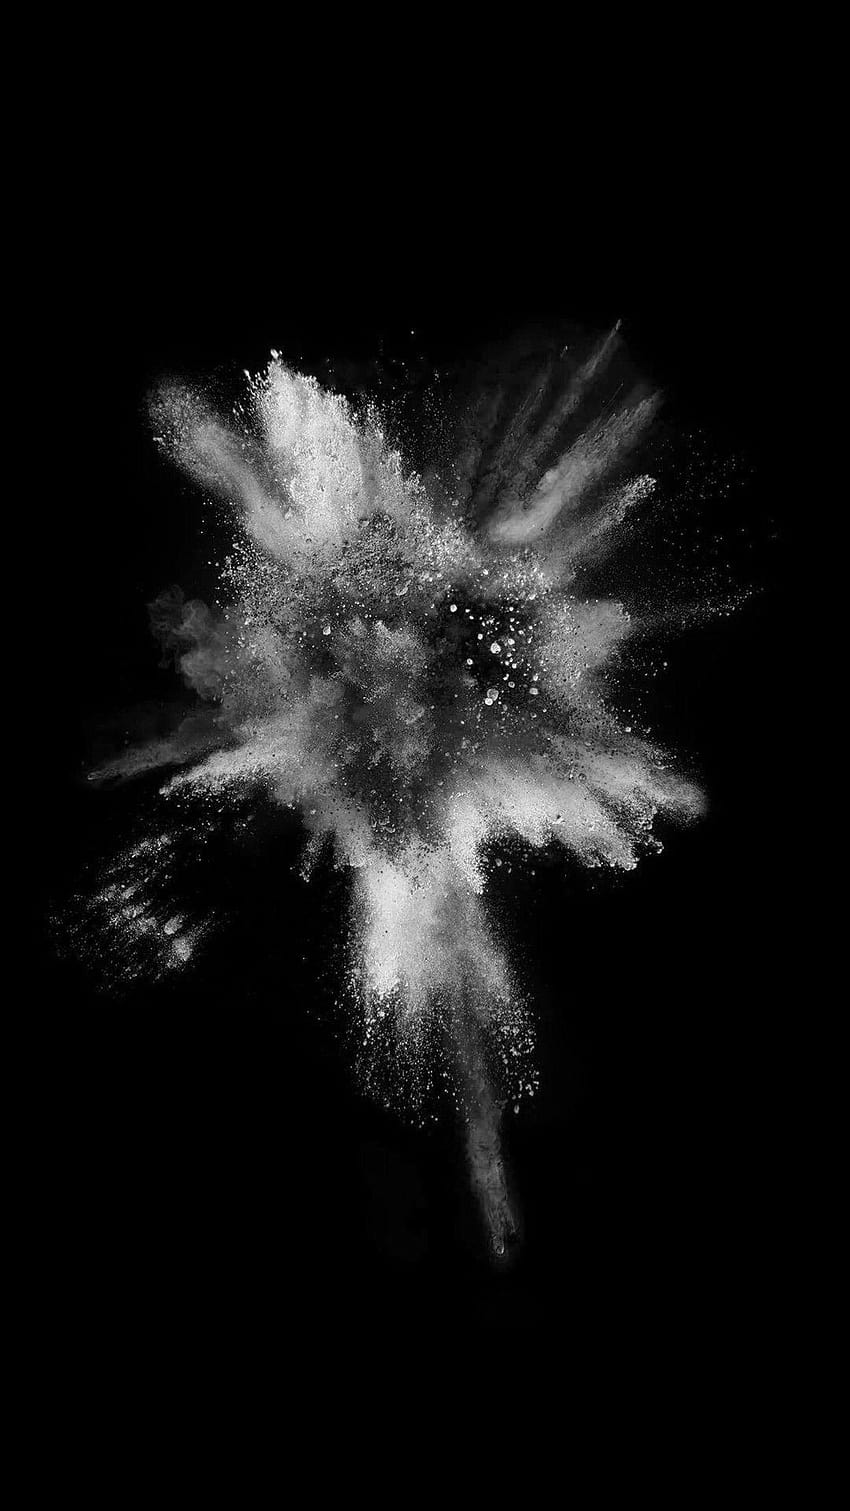 A black and white photo of a dust explosion - Dark